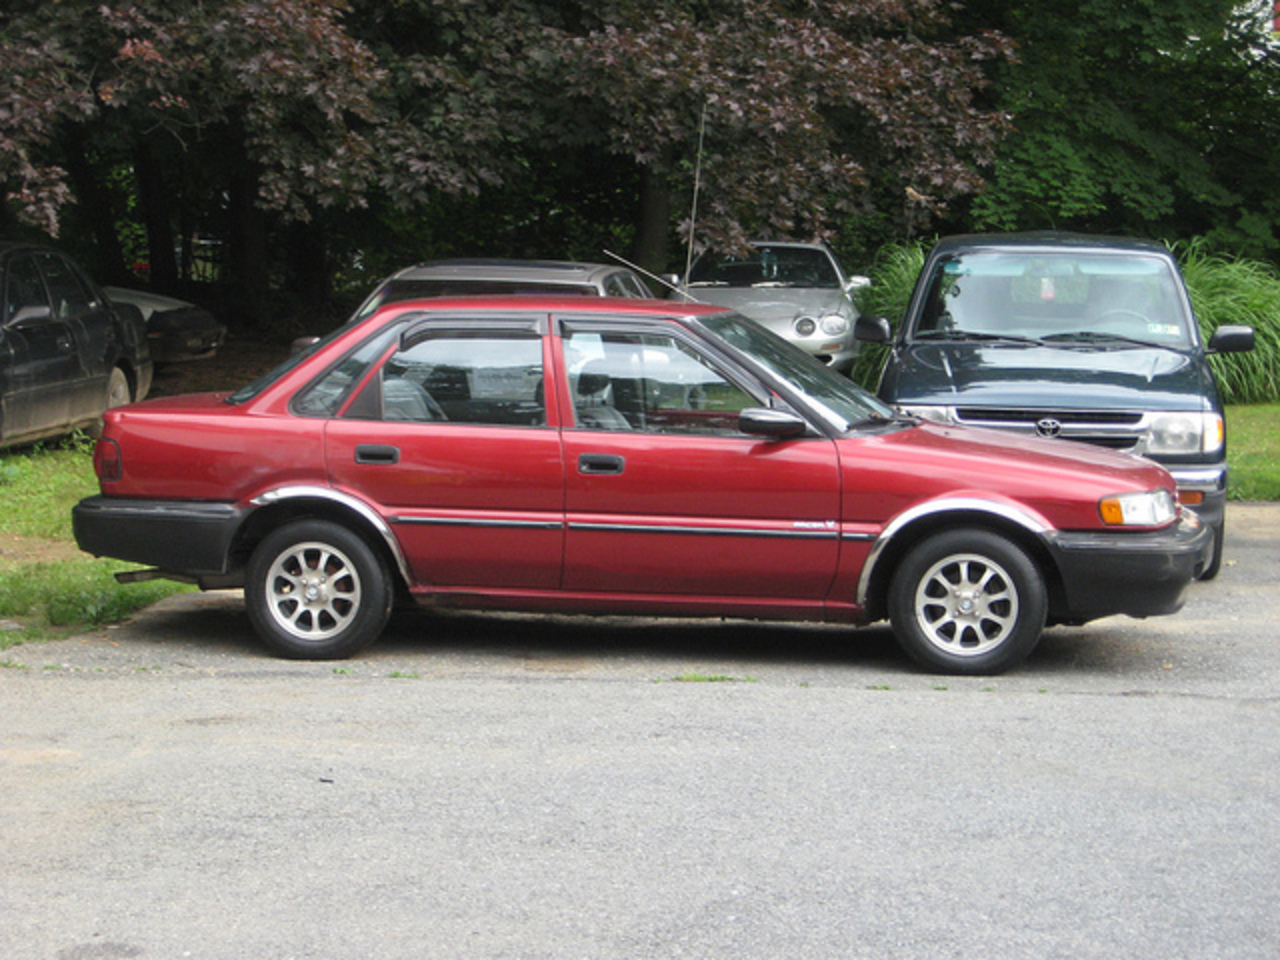 Another 1991 Geo Prizm | Flickr - Photo Sharing!